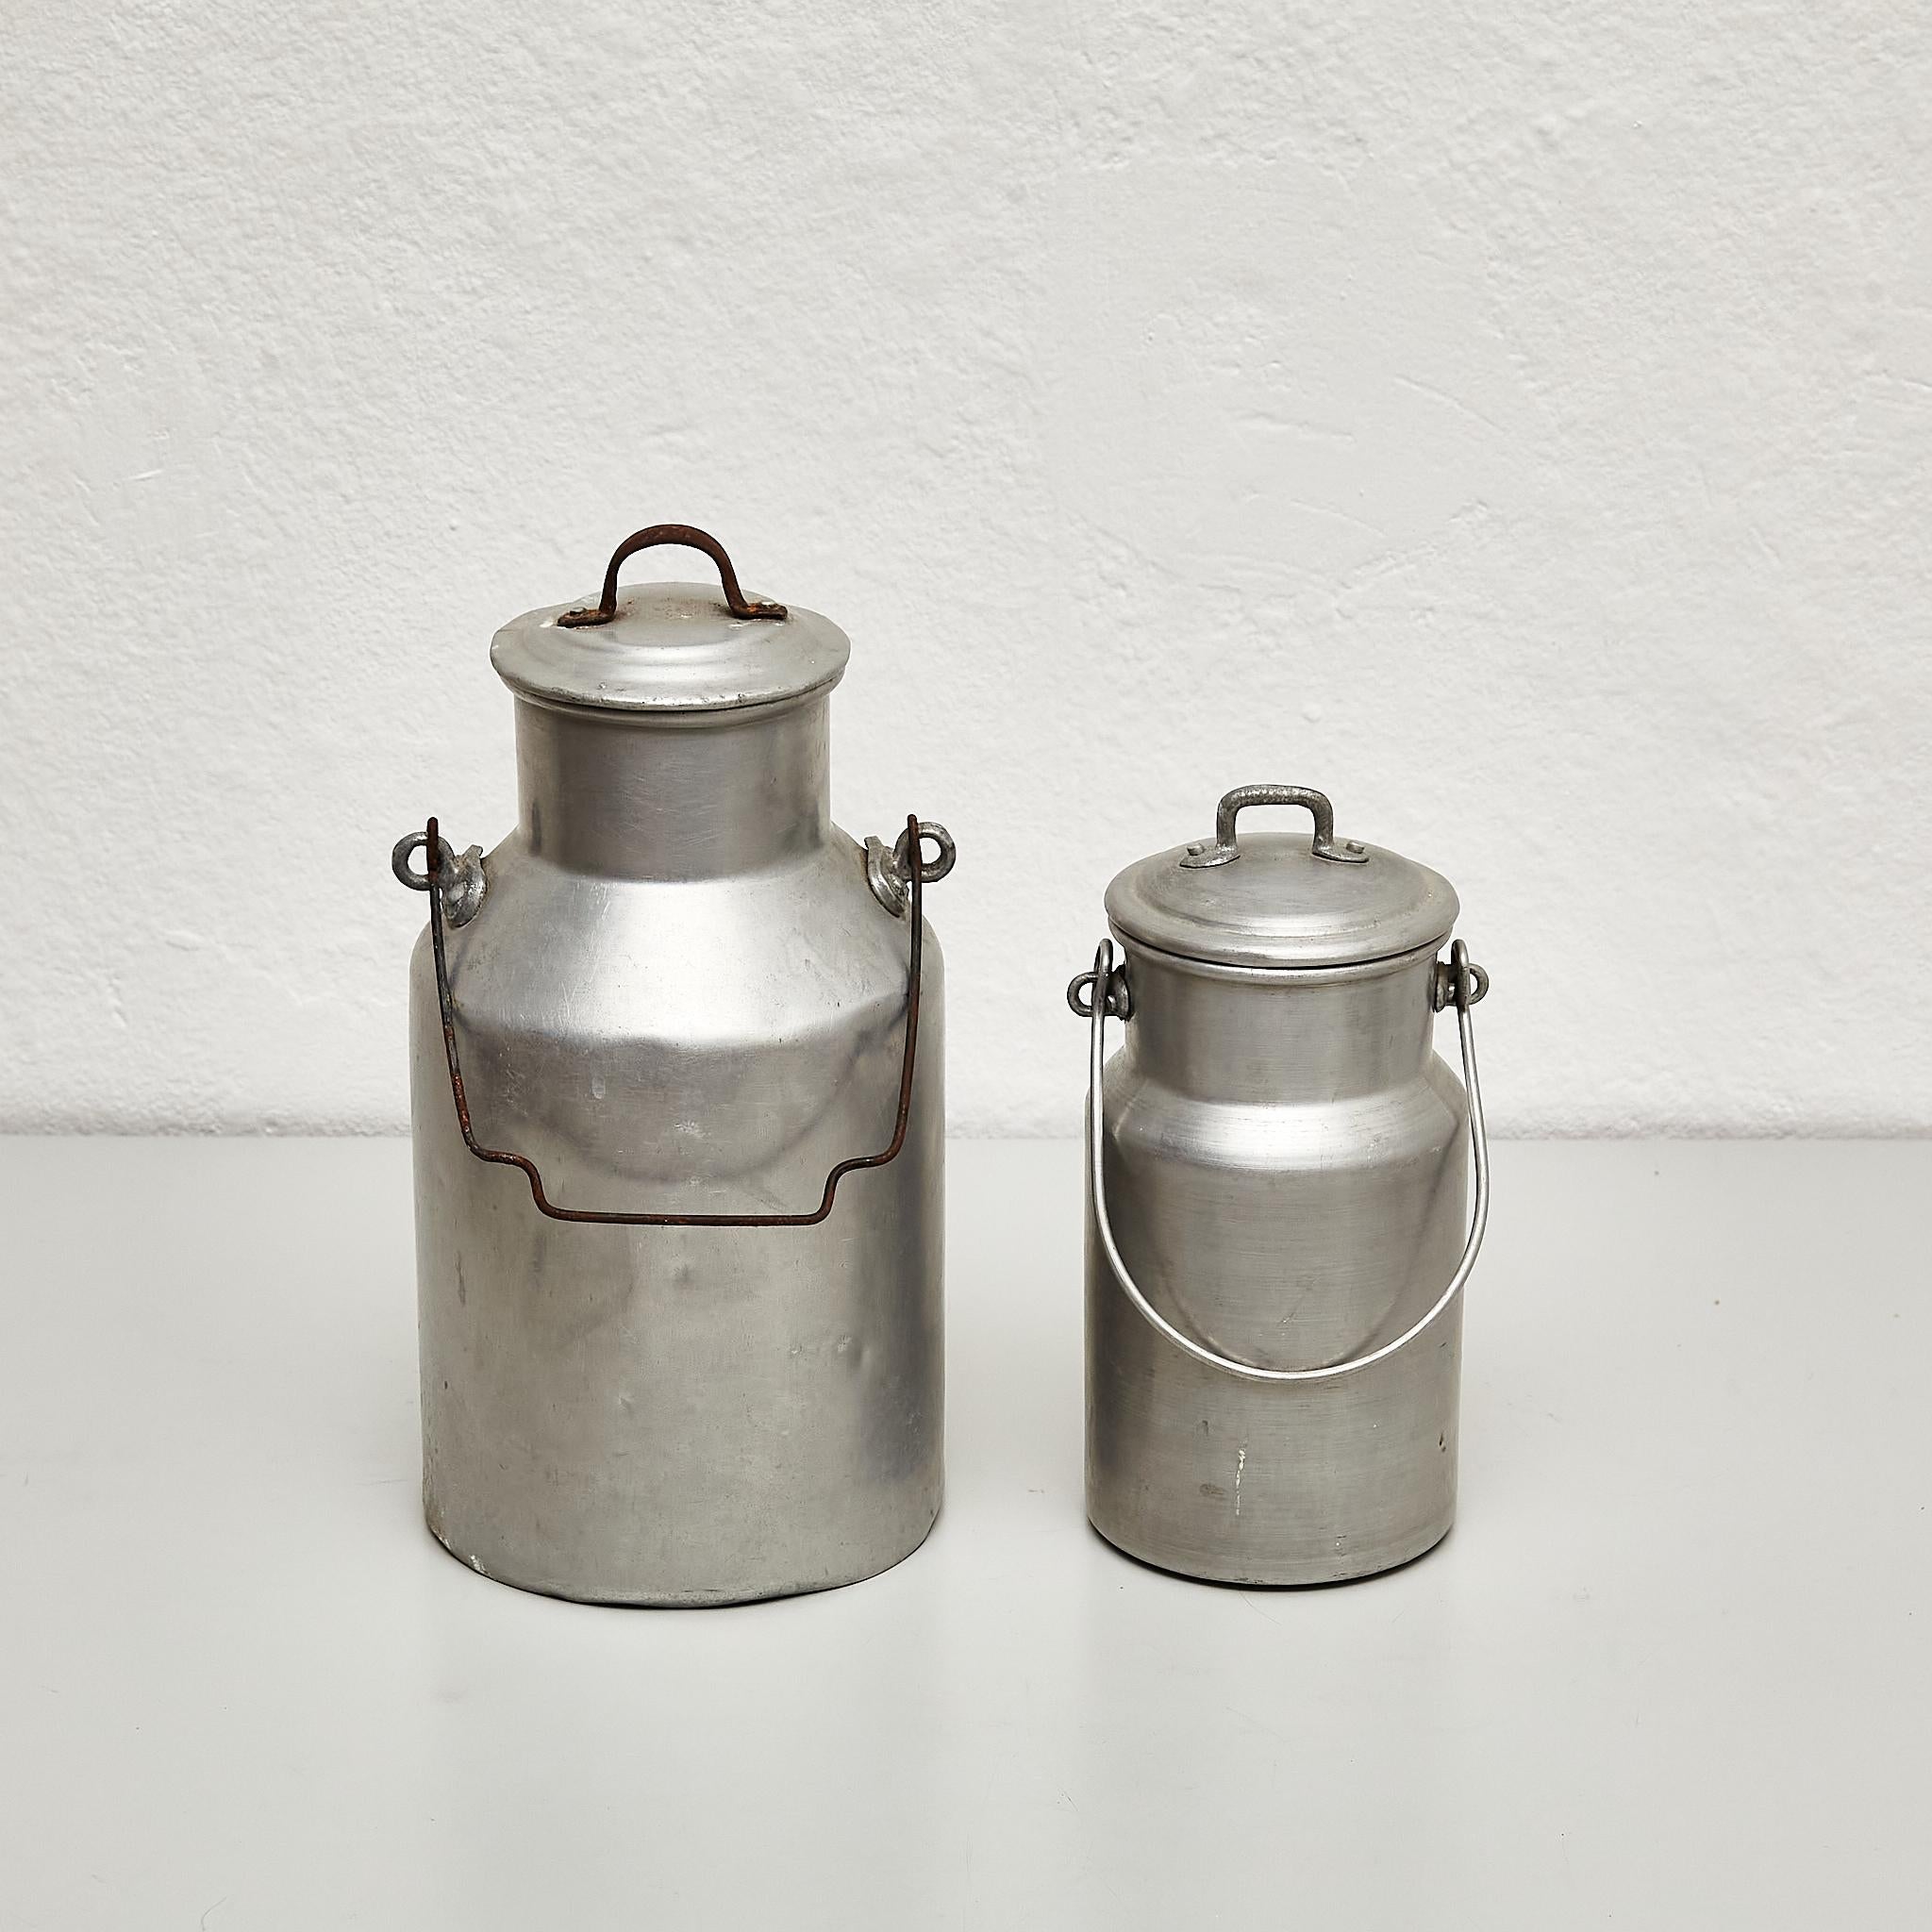 Pair of Vintage metal lidded milk pots with a handle.

By unknown manufacturer, made in Spain, circa 1950.

In original condition, with minor wear consistent with age and use, preserving a beautiful patina.

Materials:
Metal.